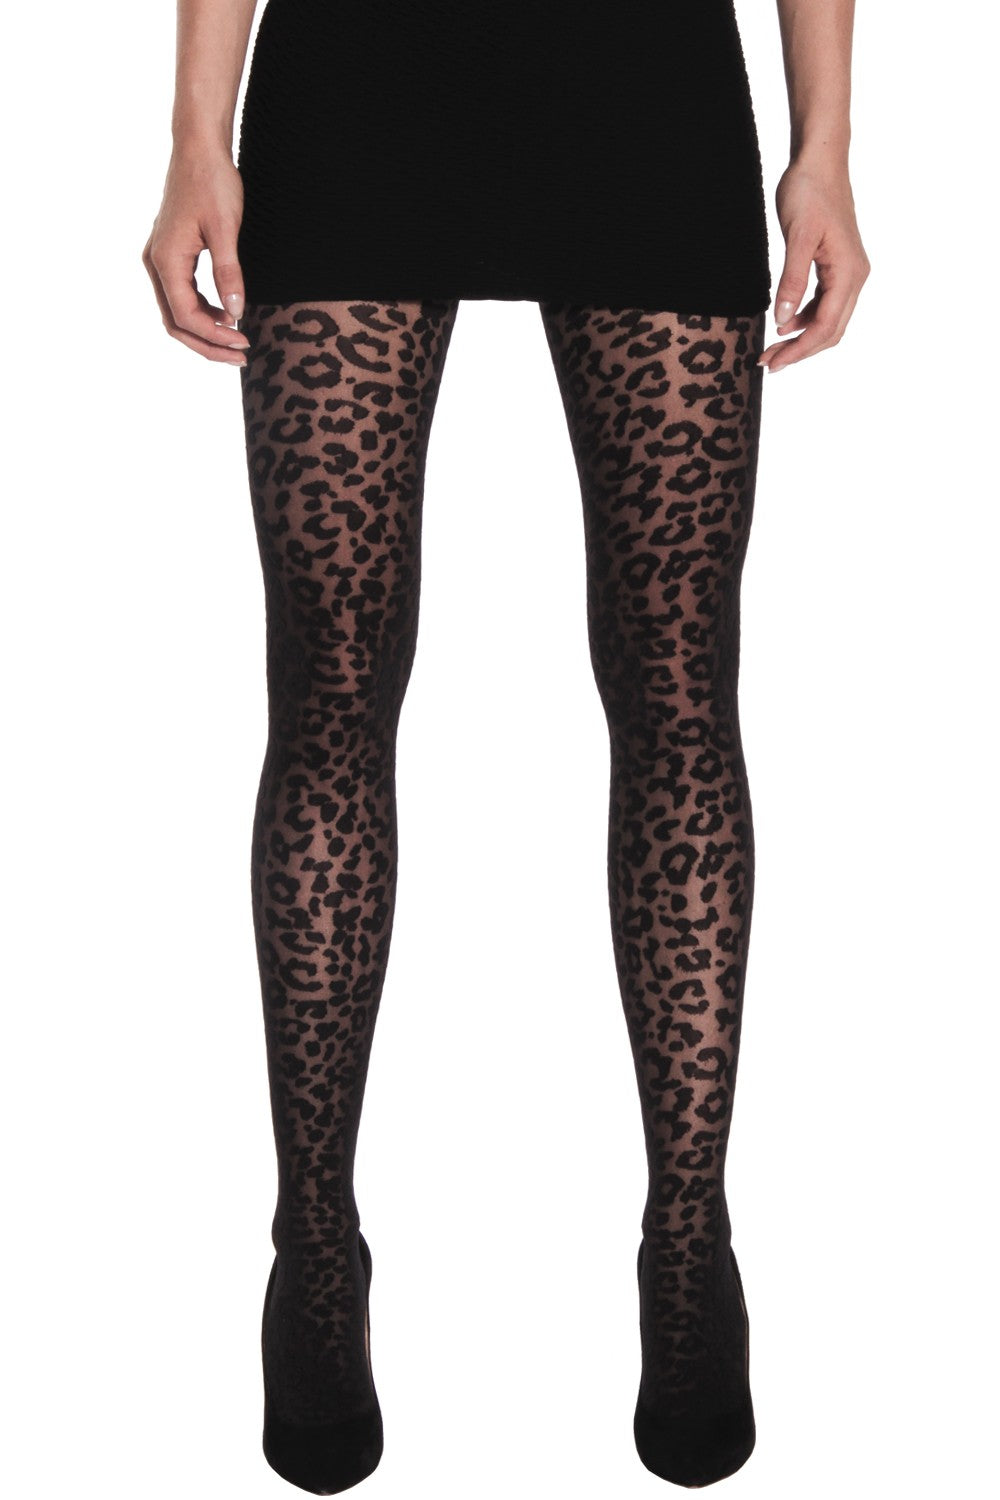 Emilio Cavallini Leopard Tights - sheer black fashion tights with an opaque animal print pattern